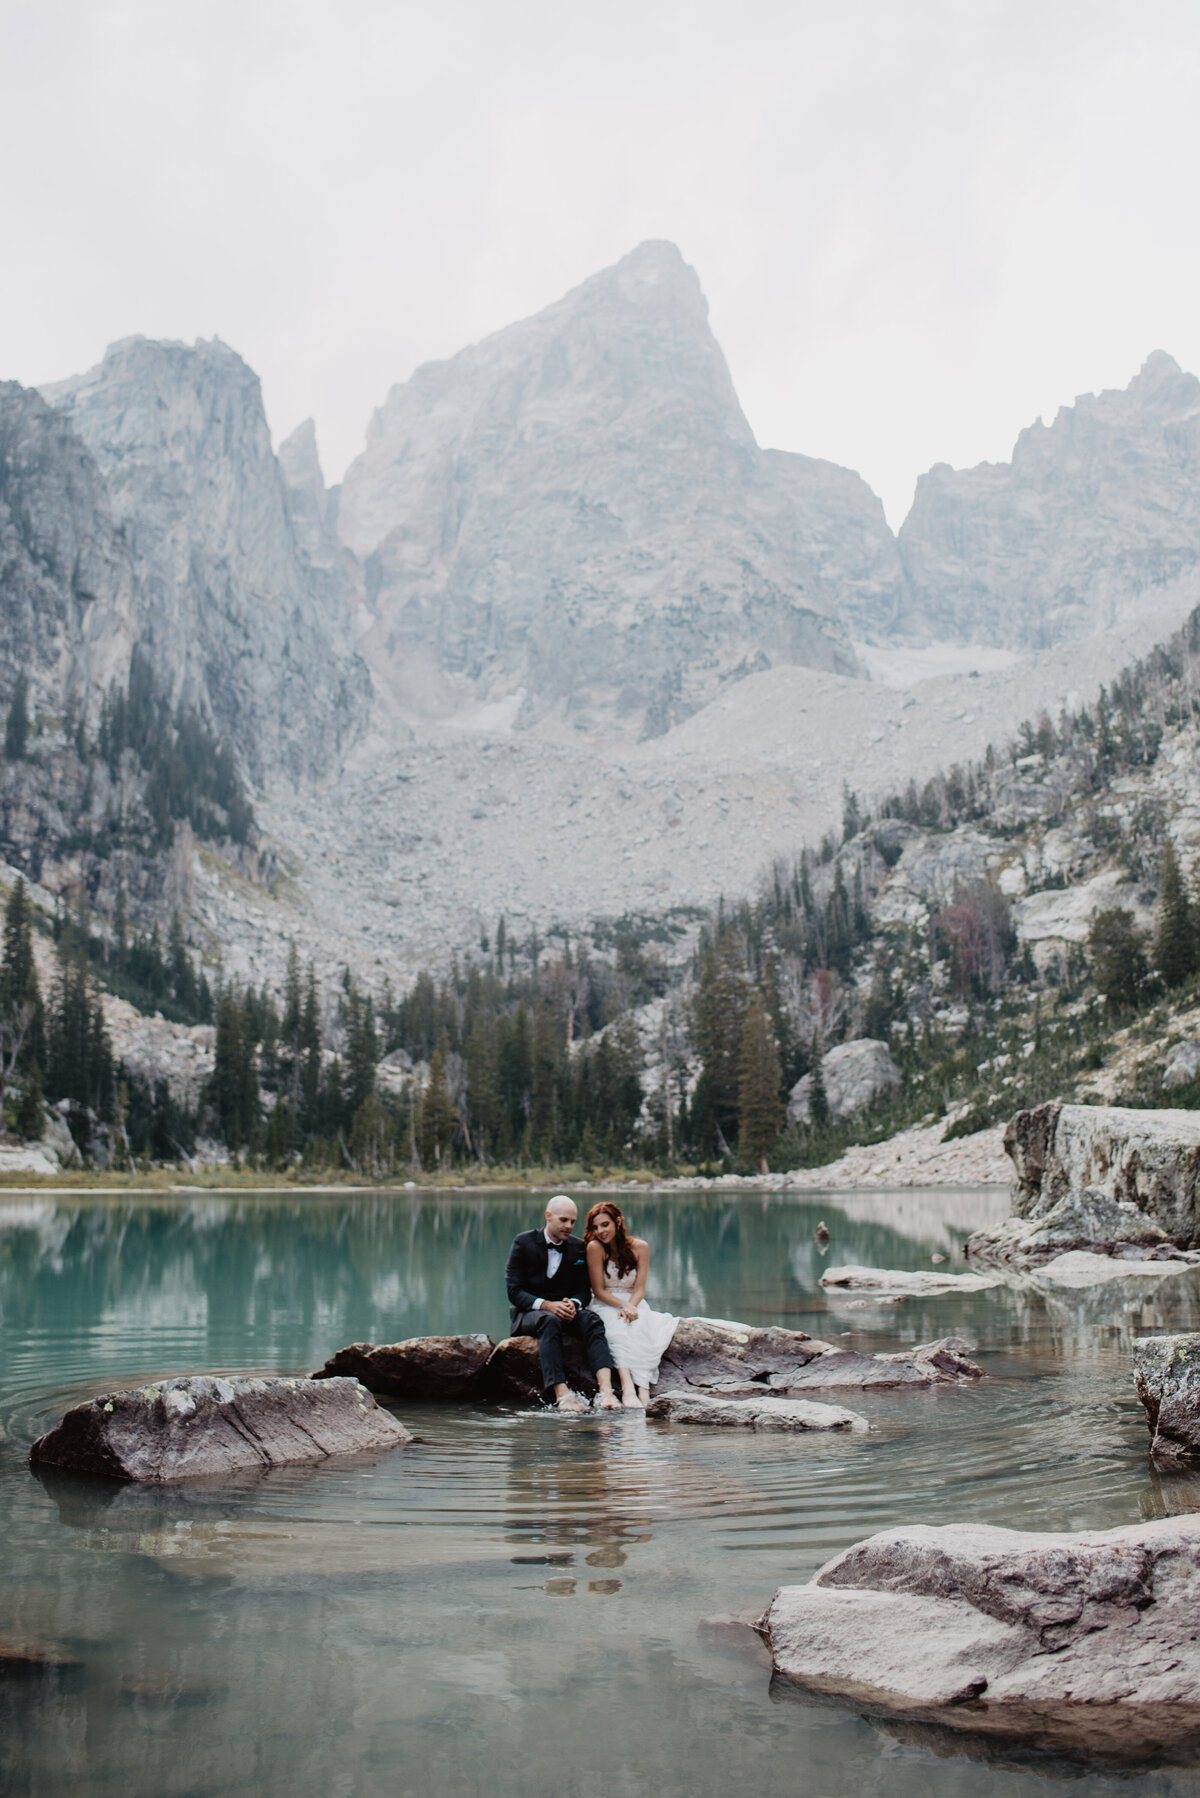 Jackson Hole Photographers capture couple sitting on rock together in Grand Teton elopement